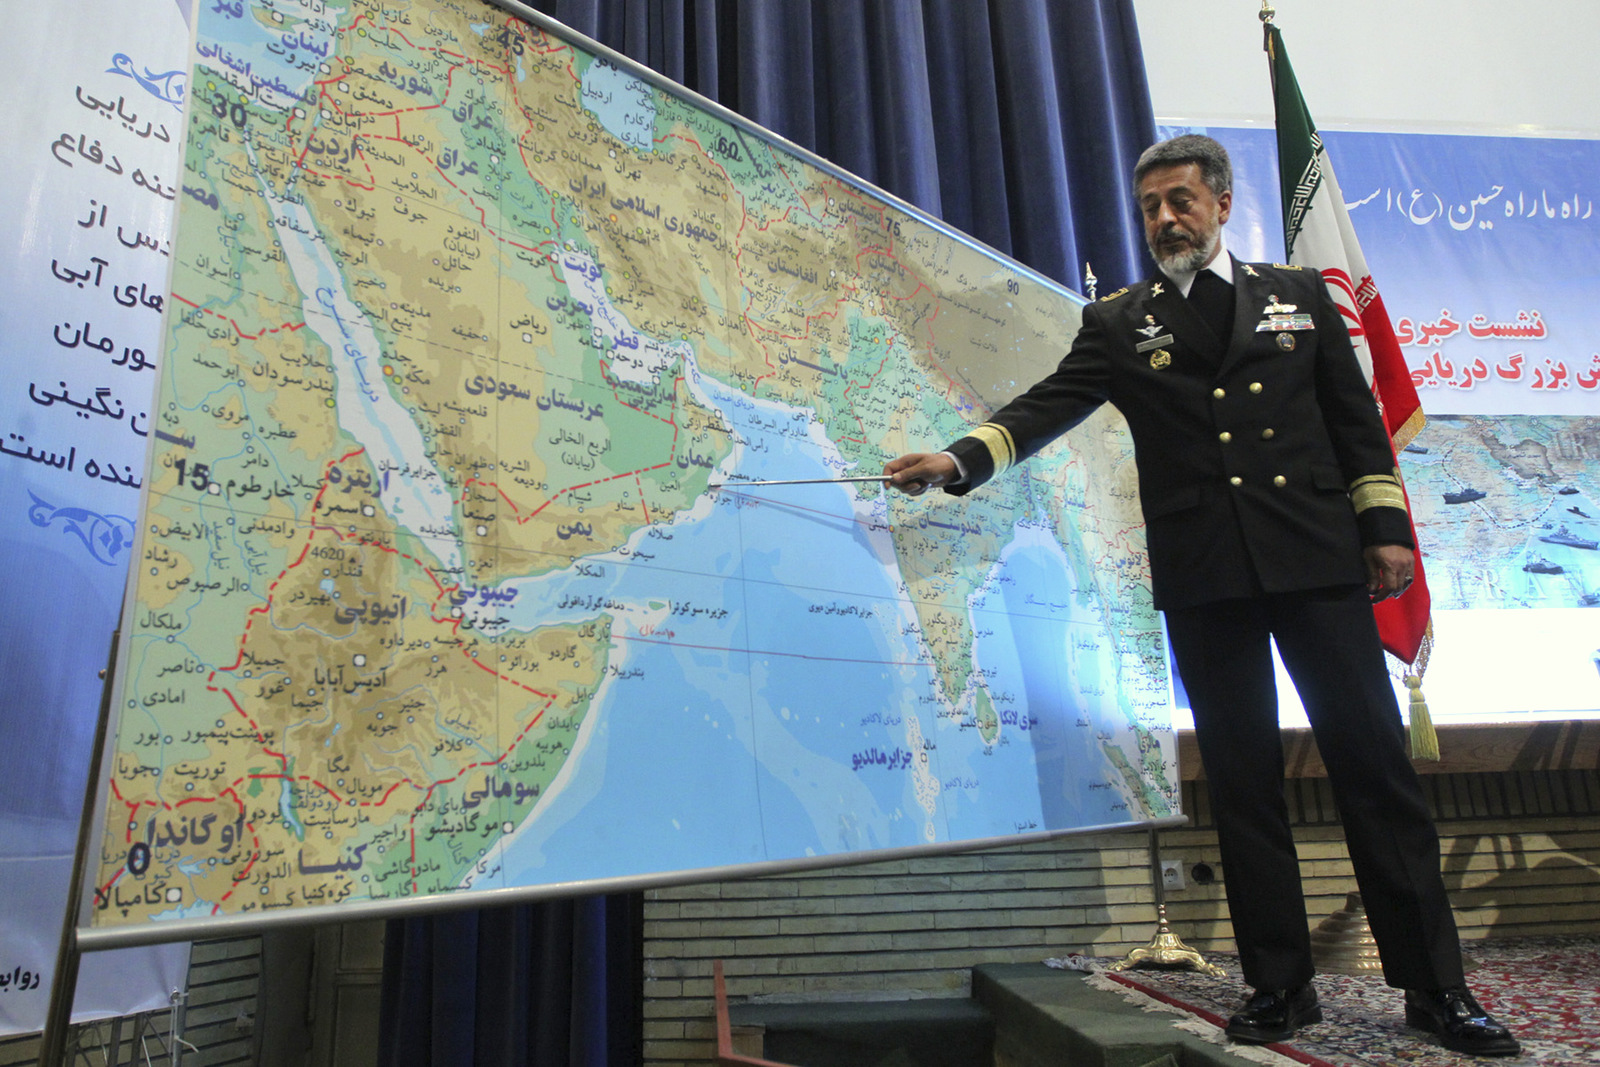 Iran's navy chief Adm. Habibollah Sayyari briefs media on an upcoming naval exercise, in a press conference in Tehran, Iran, Thursday, Dec. 22, 2011. Sayyari said Thursday his forces plan to hold a 10-day drill in international waters beyond the strategic Strait of Hormuz at the mouth of the Persian Gulf _ an exercise that could bring Iranian ships into proximity with U.S. Navy vessels. (AP/Fars News Agency, Hamed Jafarnejad)